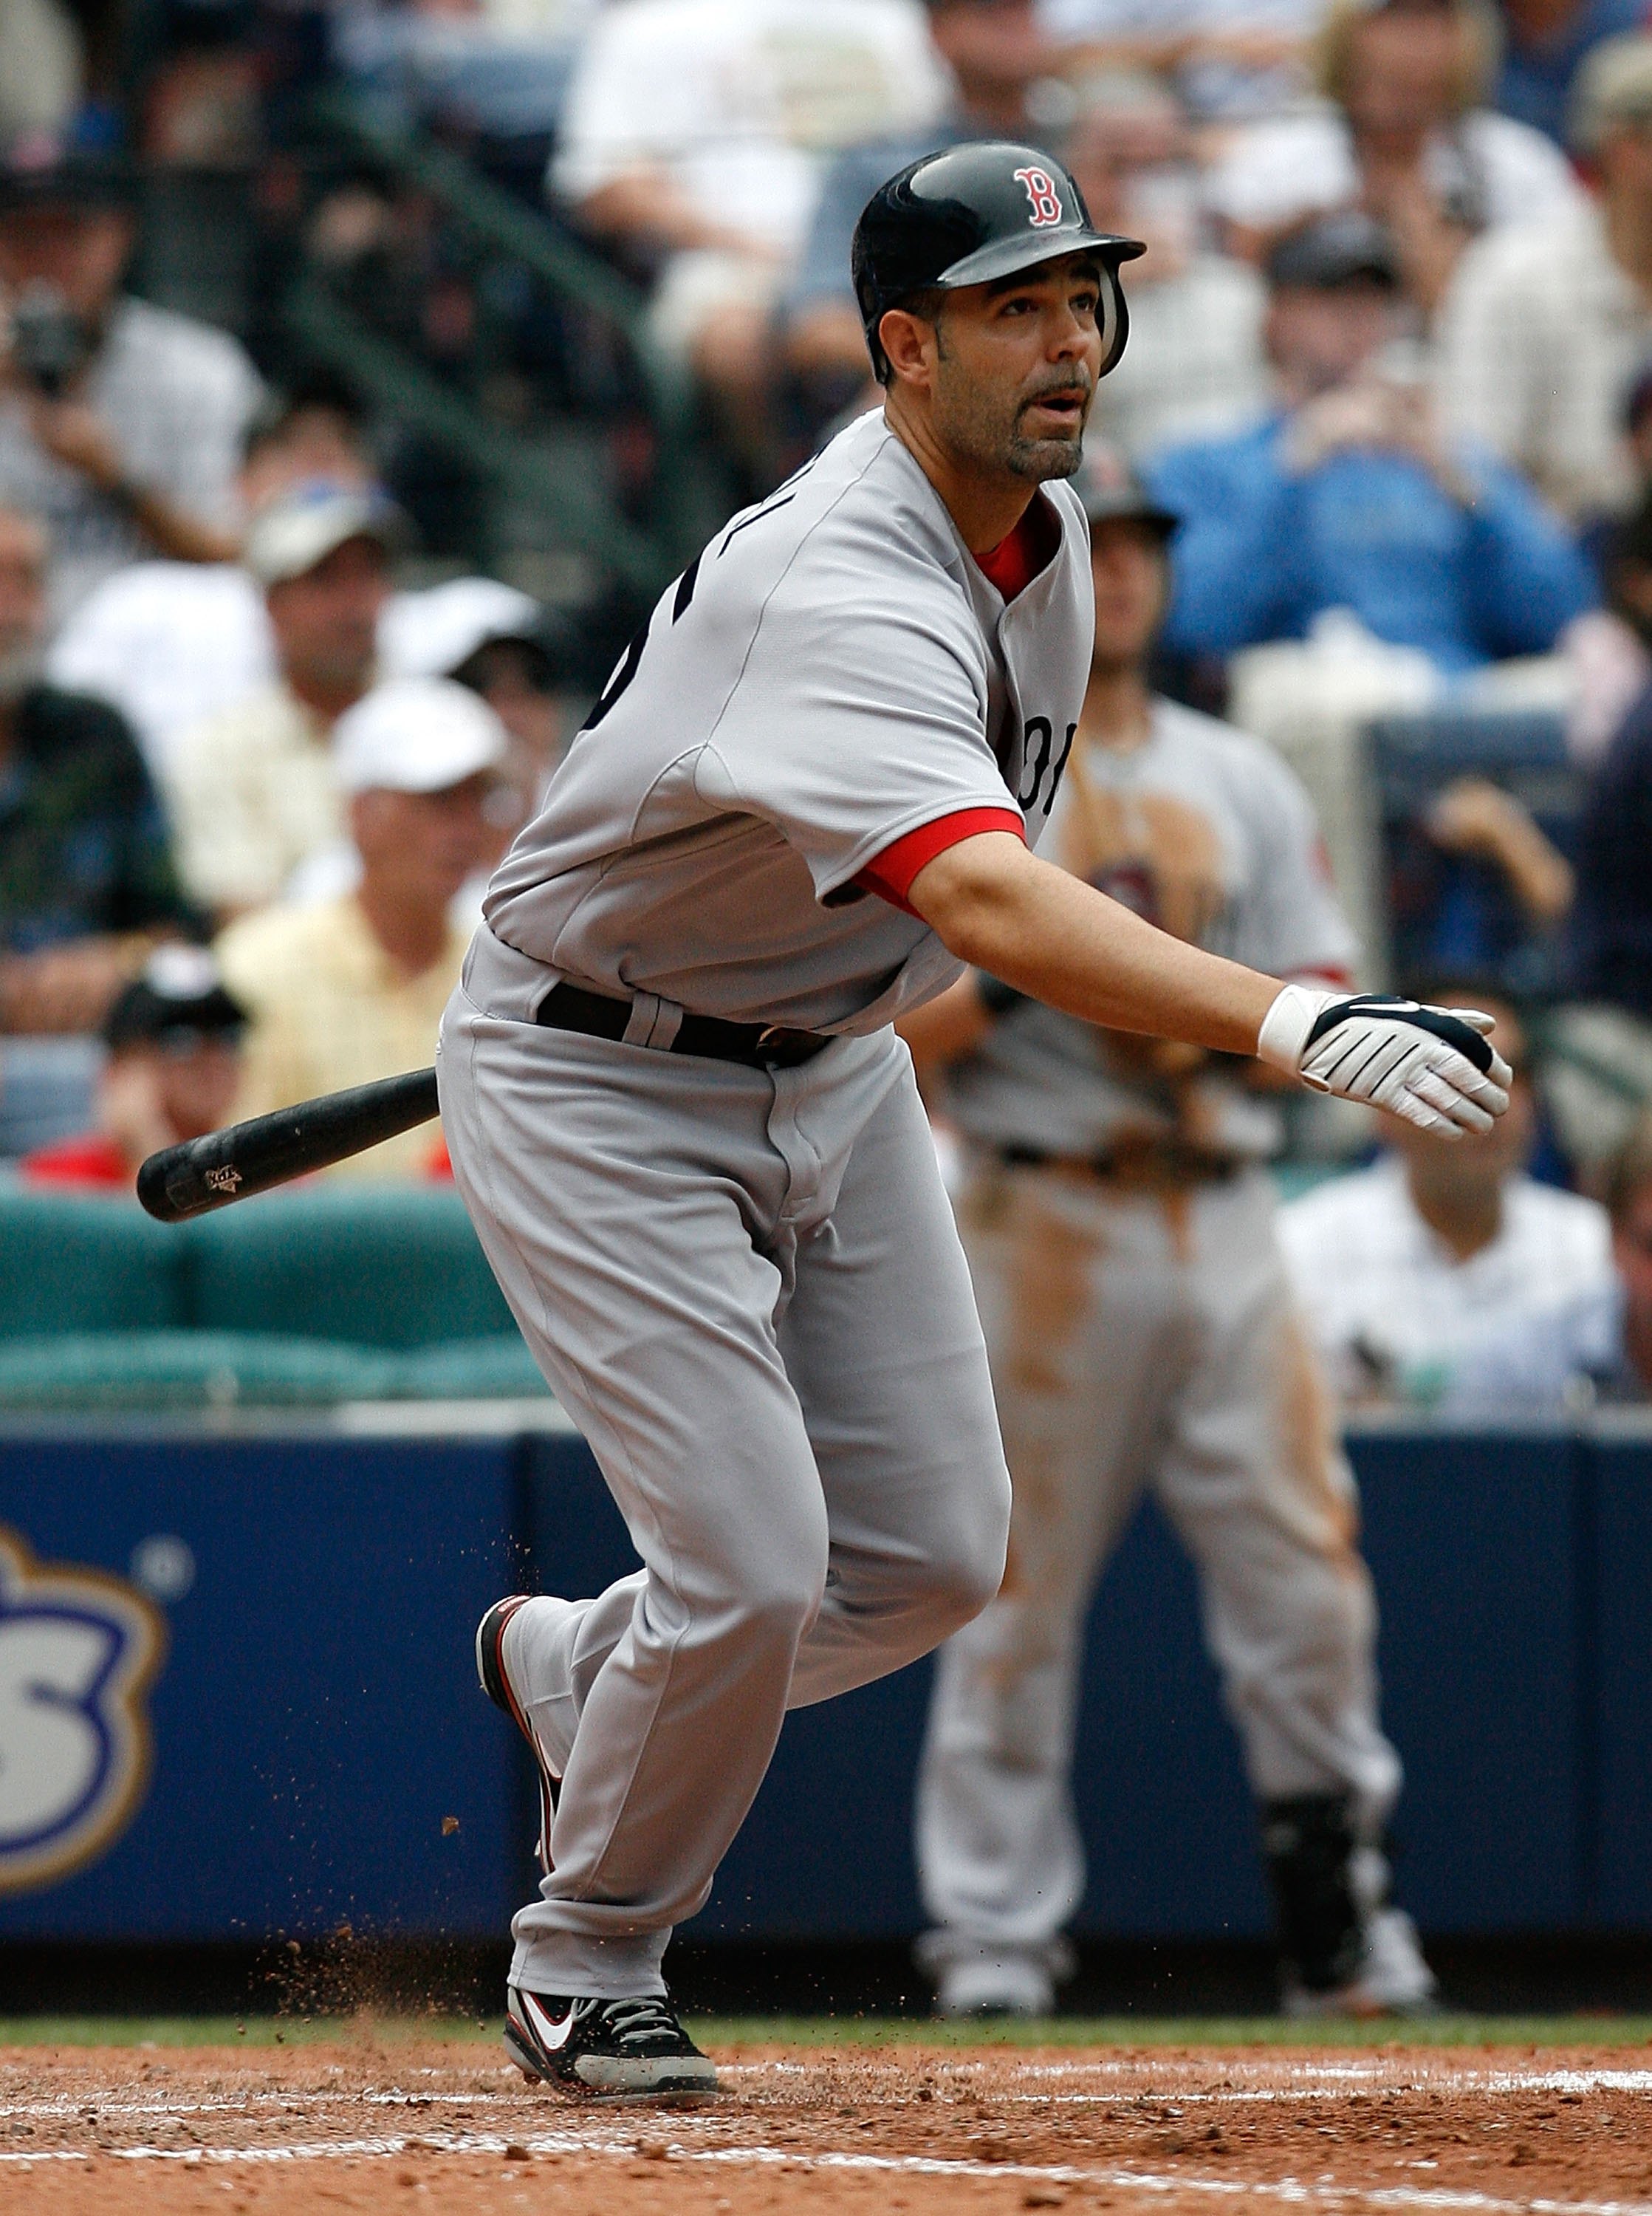 Catching up with old friends: Mike Lowell